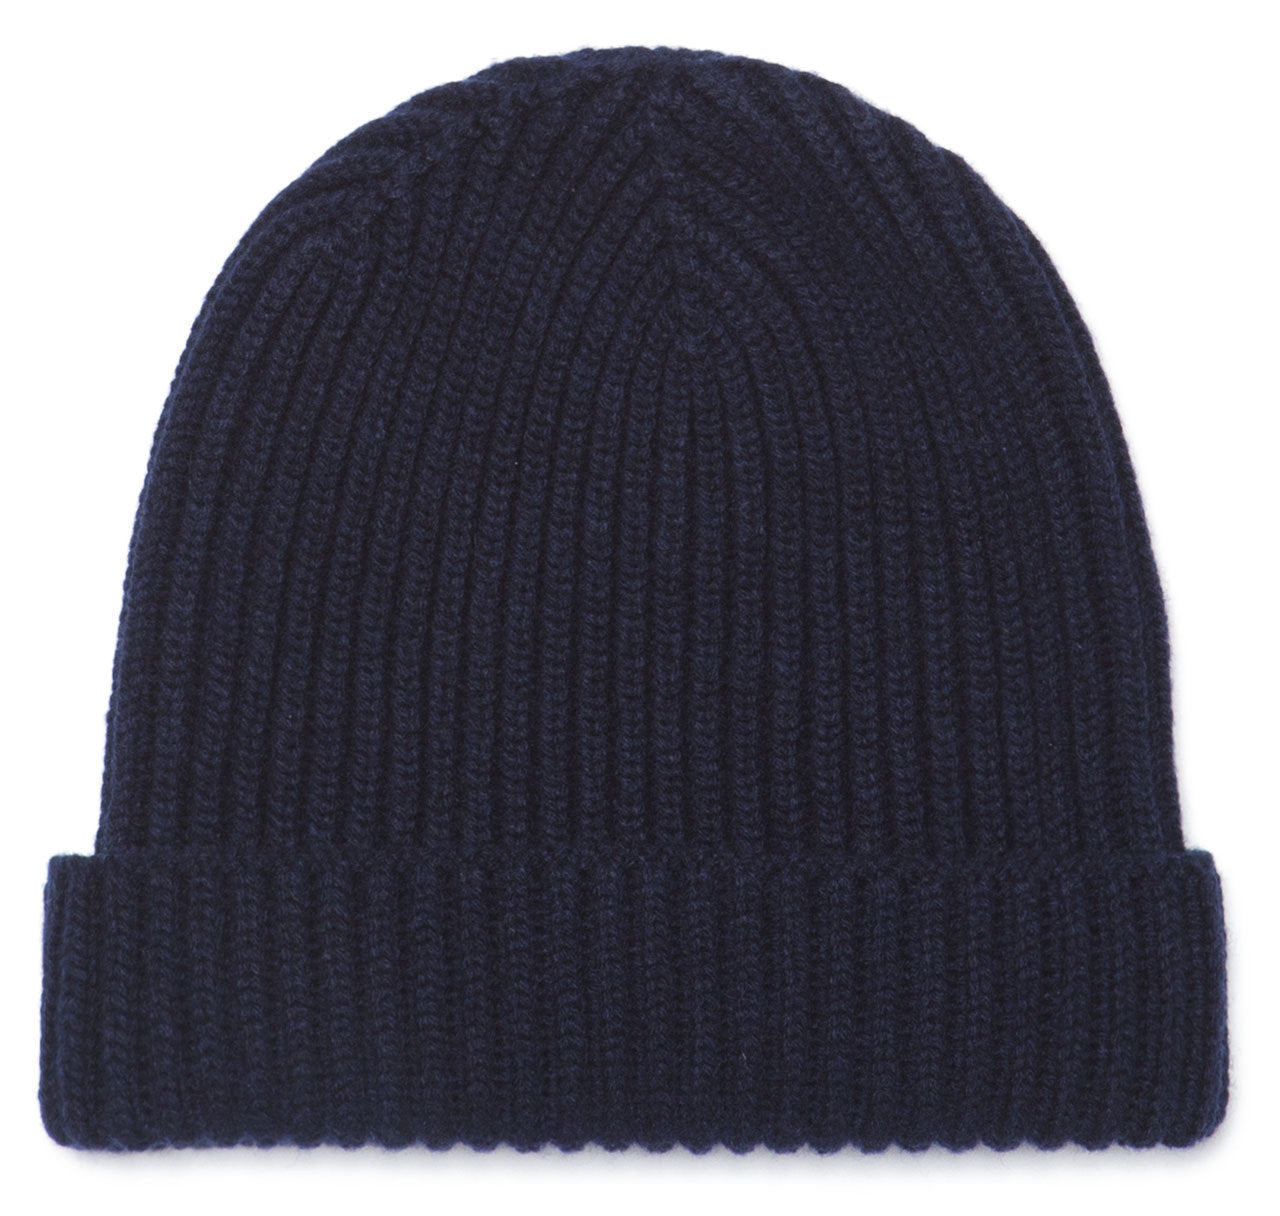 Sir Jack's Classic Pure Cashmere Navy Watch Cap